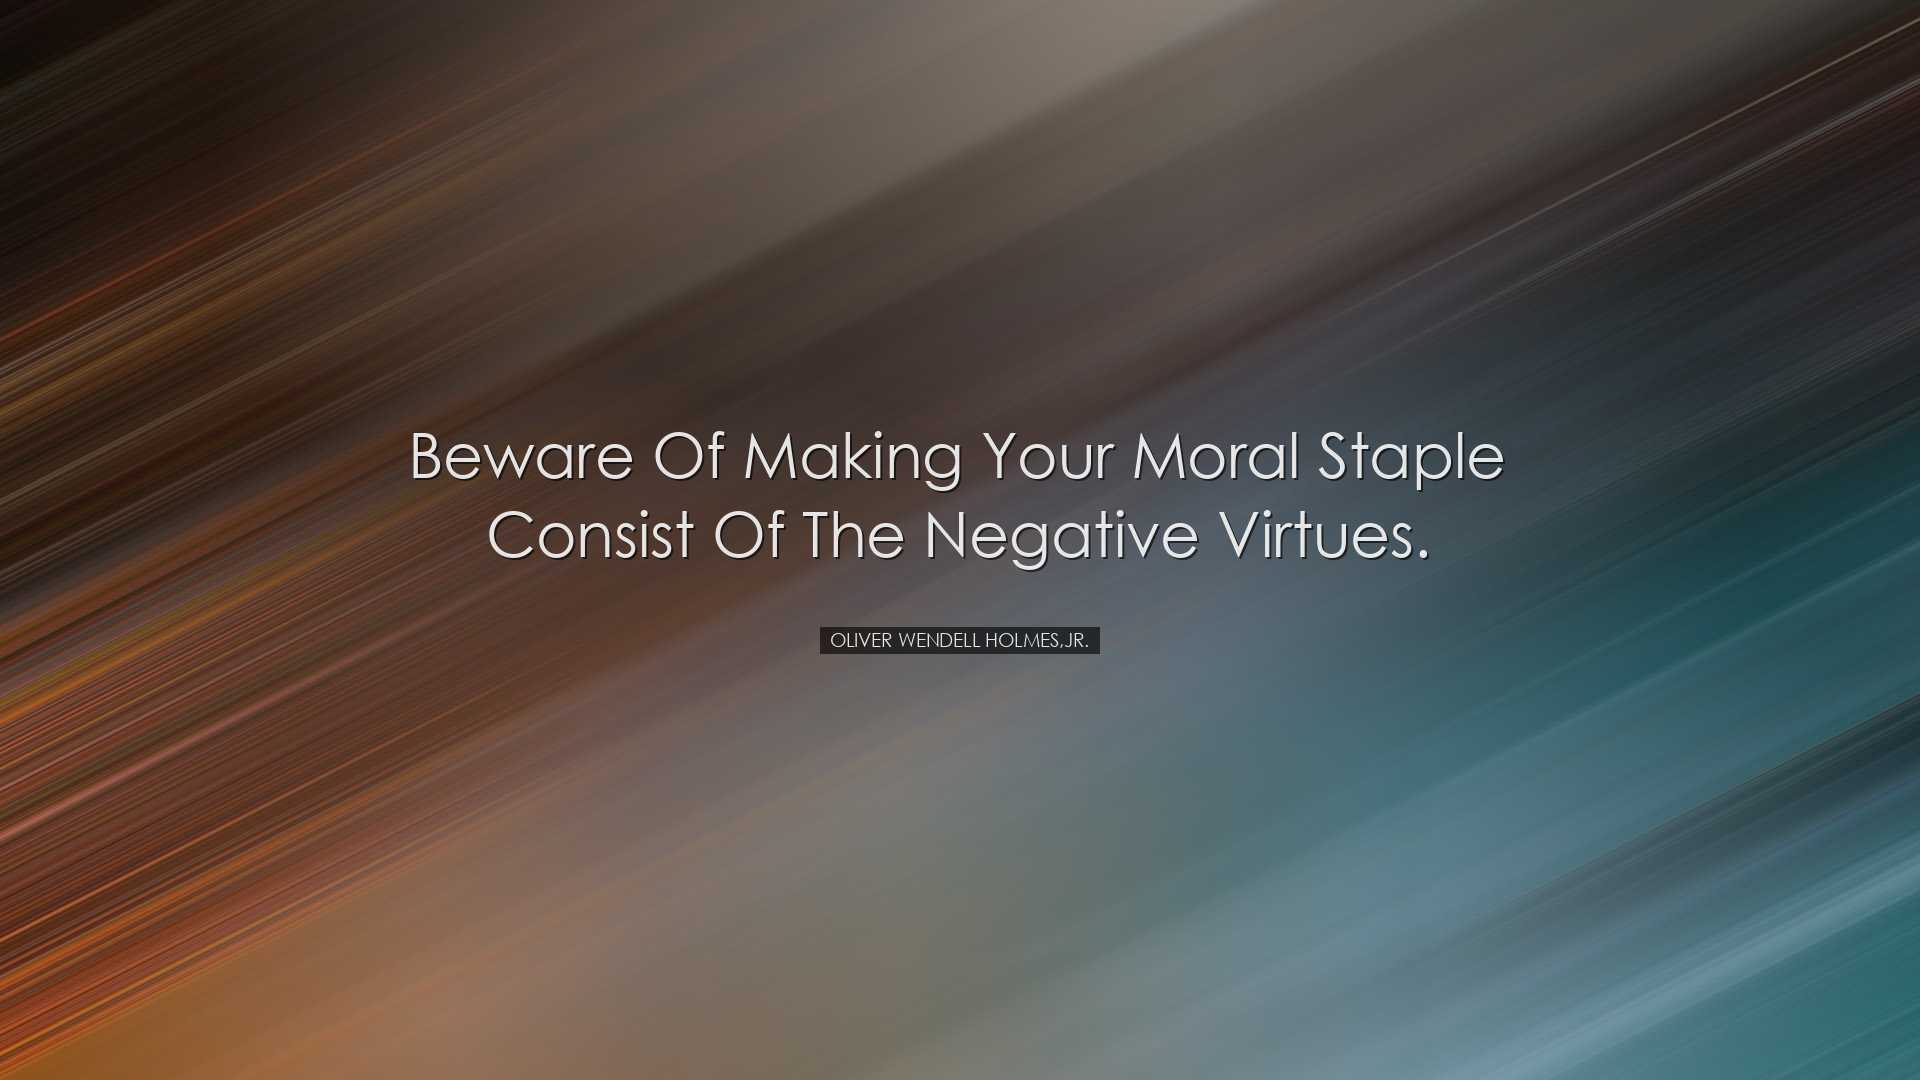 Beware of making your moral staple consist of the negative virtues